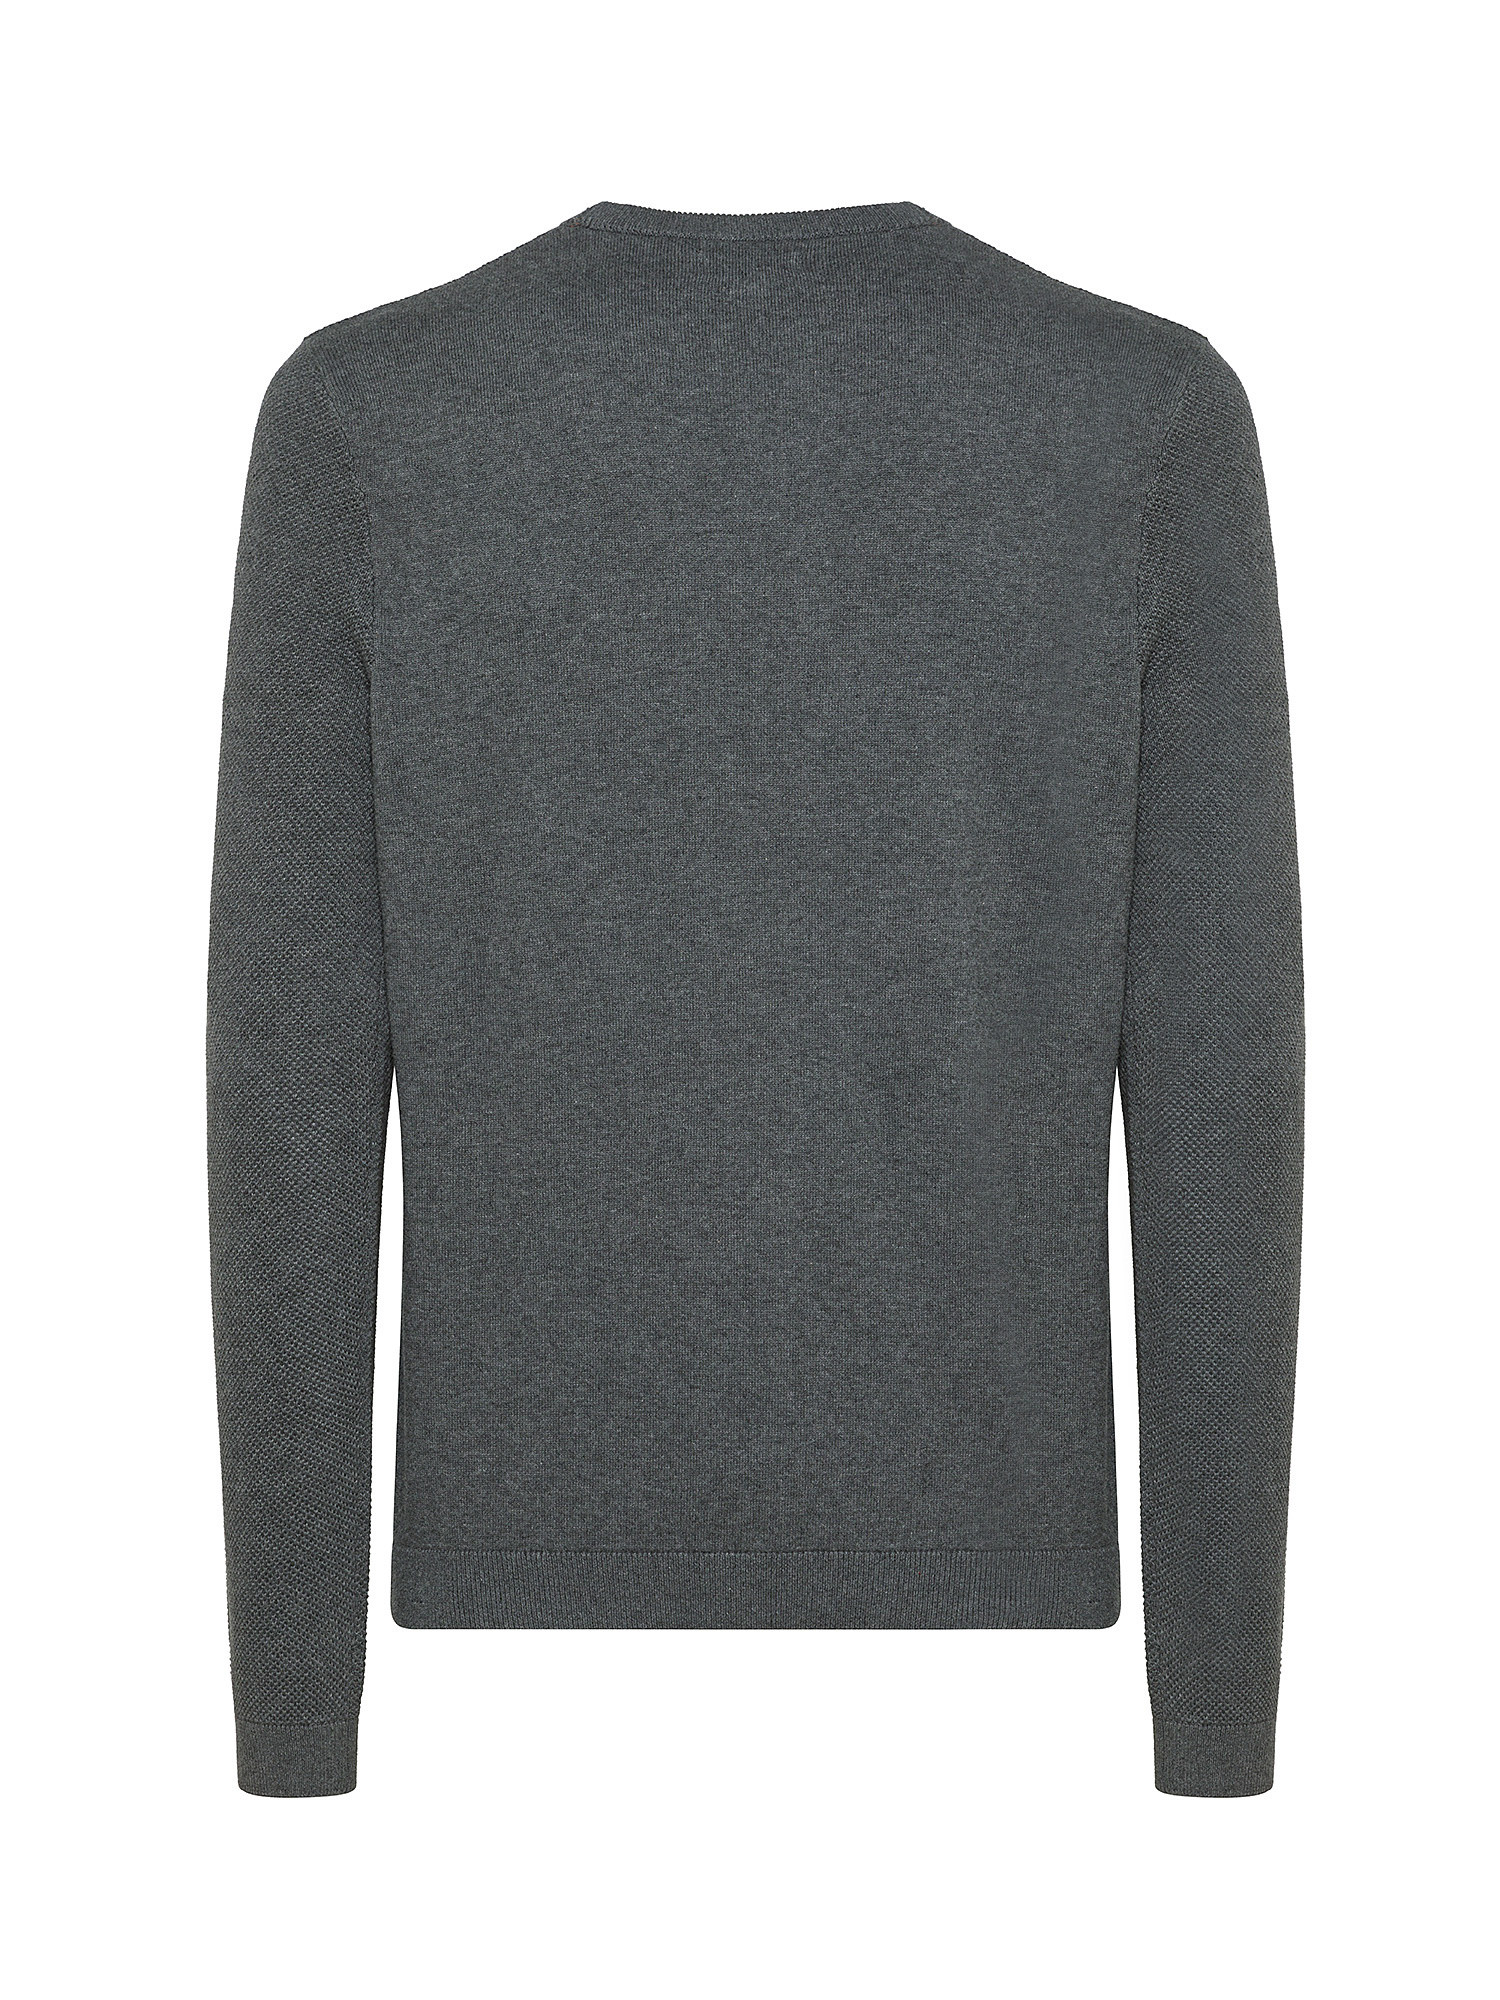 Luca D'Altieri - Crew neck sweater in pure cotton, Grey, large image number 1